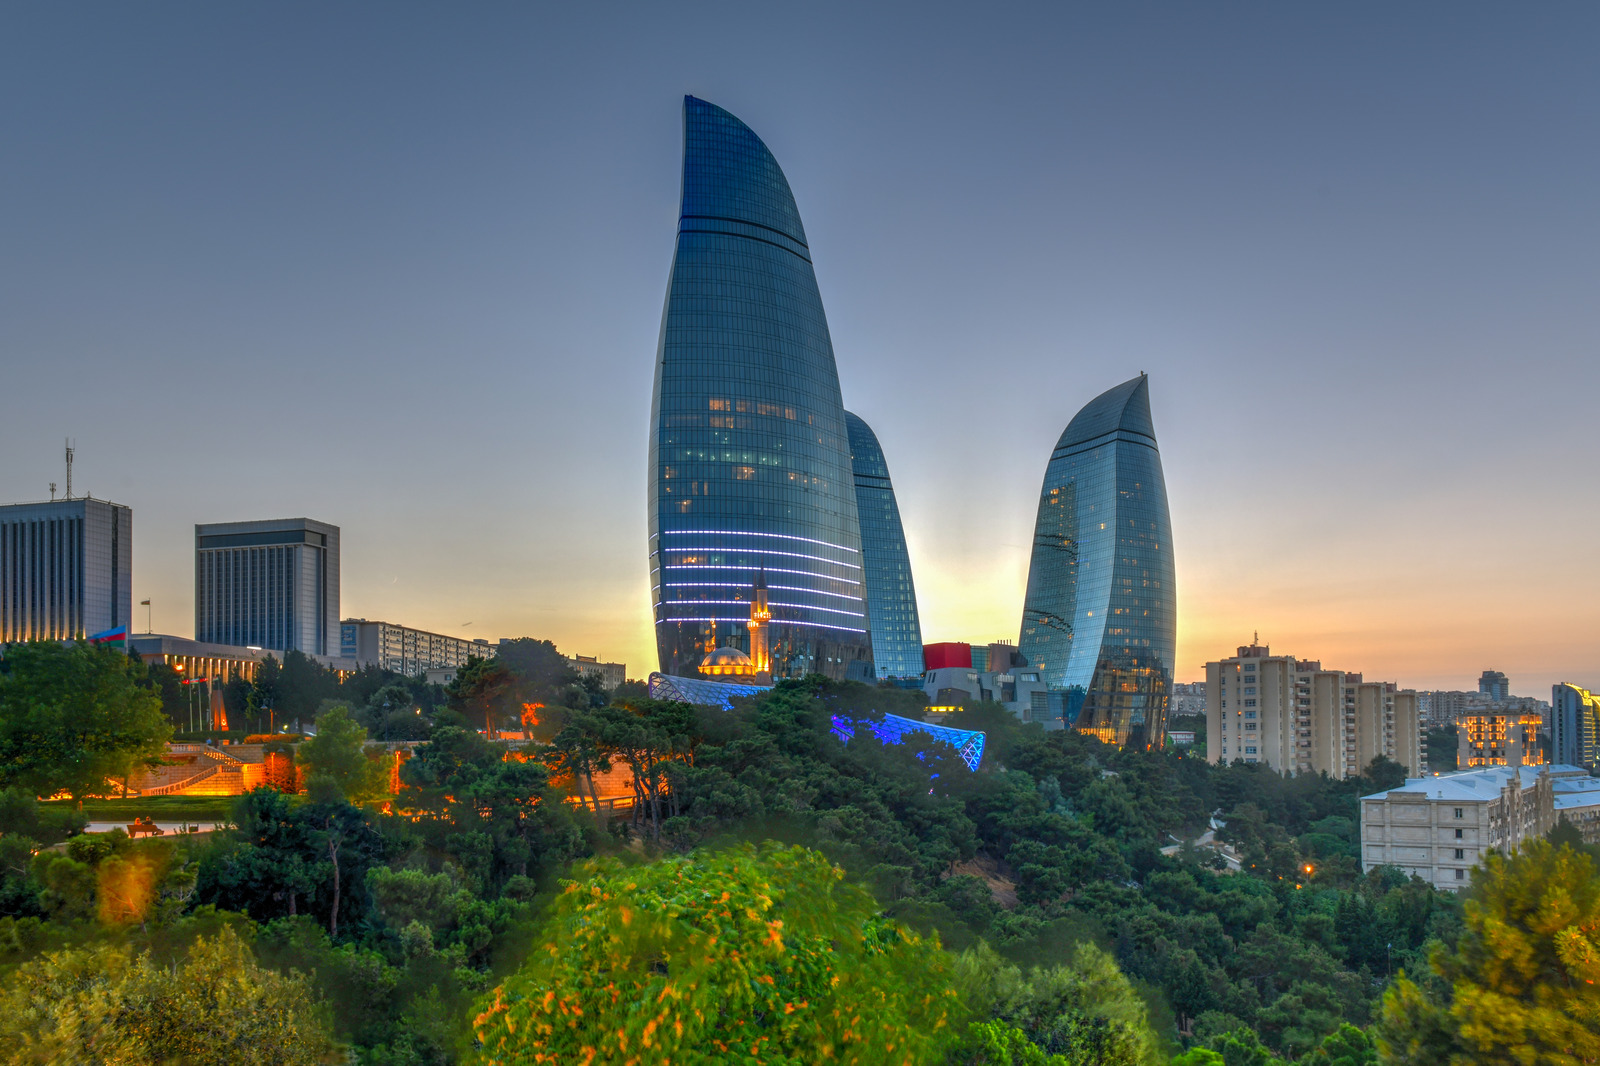 The Flame Towers in Baku, Azerbaijan. A view of the city skyline on a dramatical sunset.